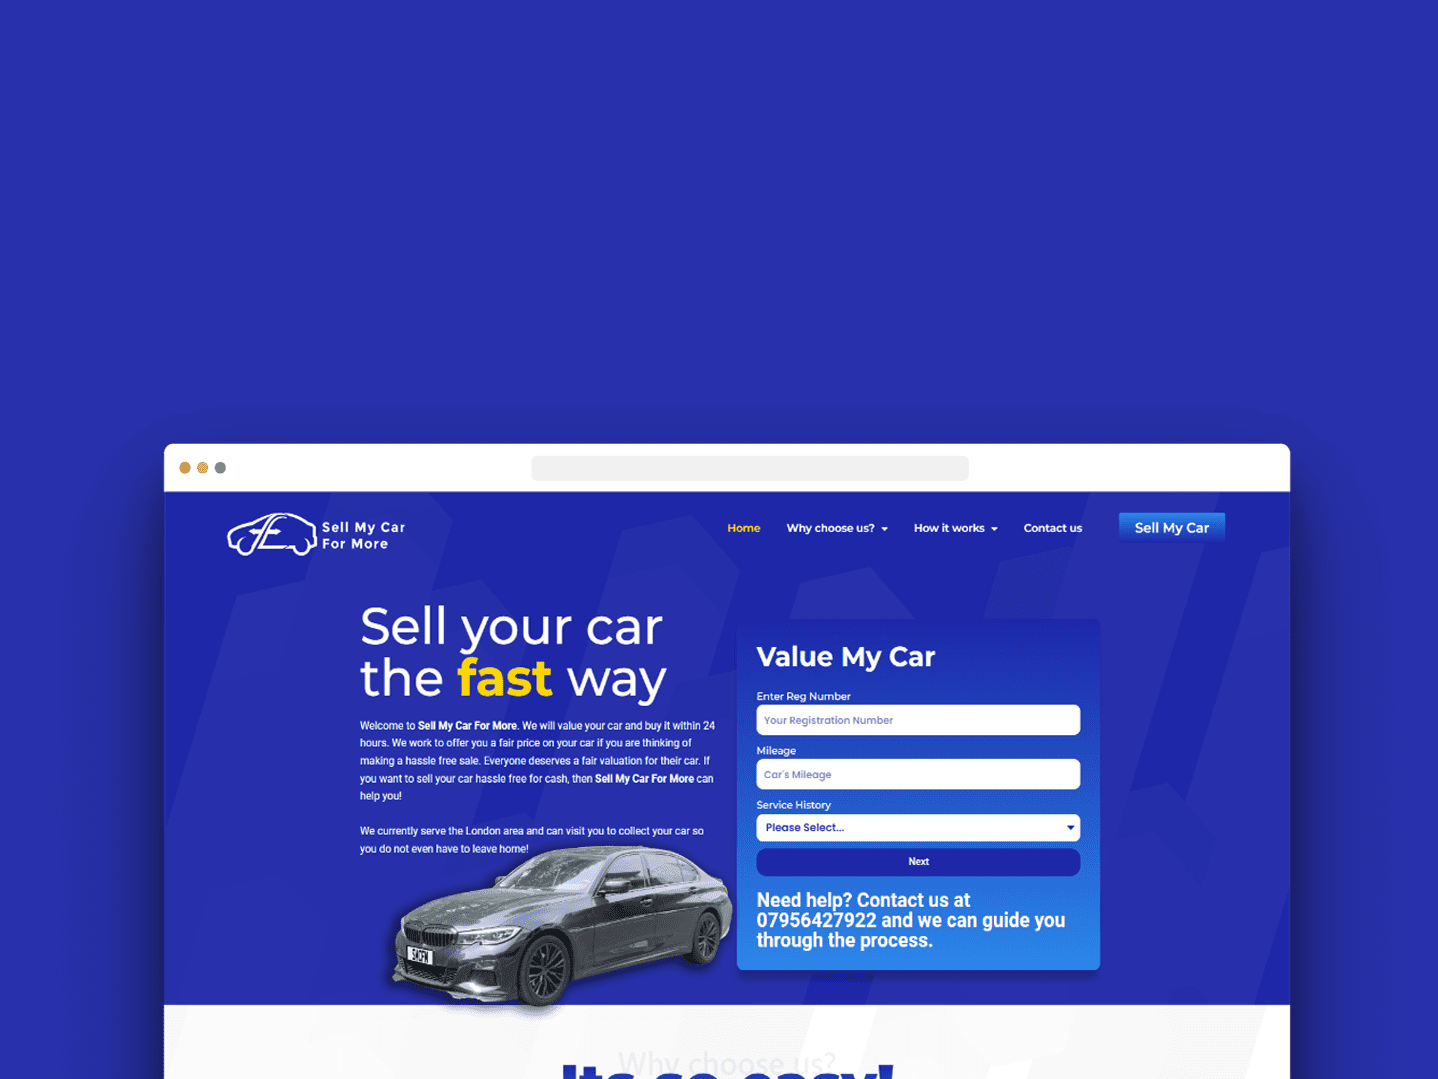 Sell My Car For More - case study featured image